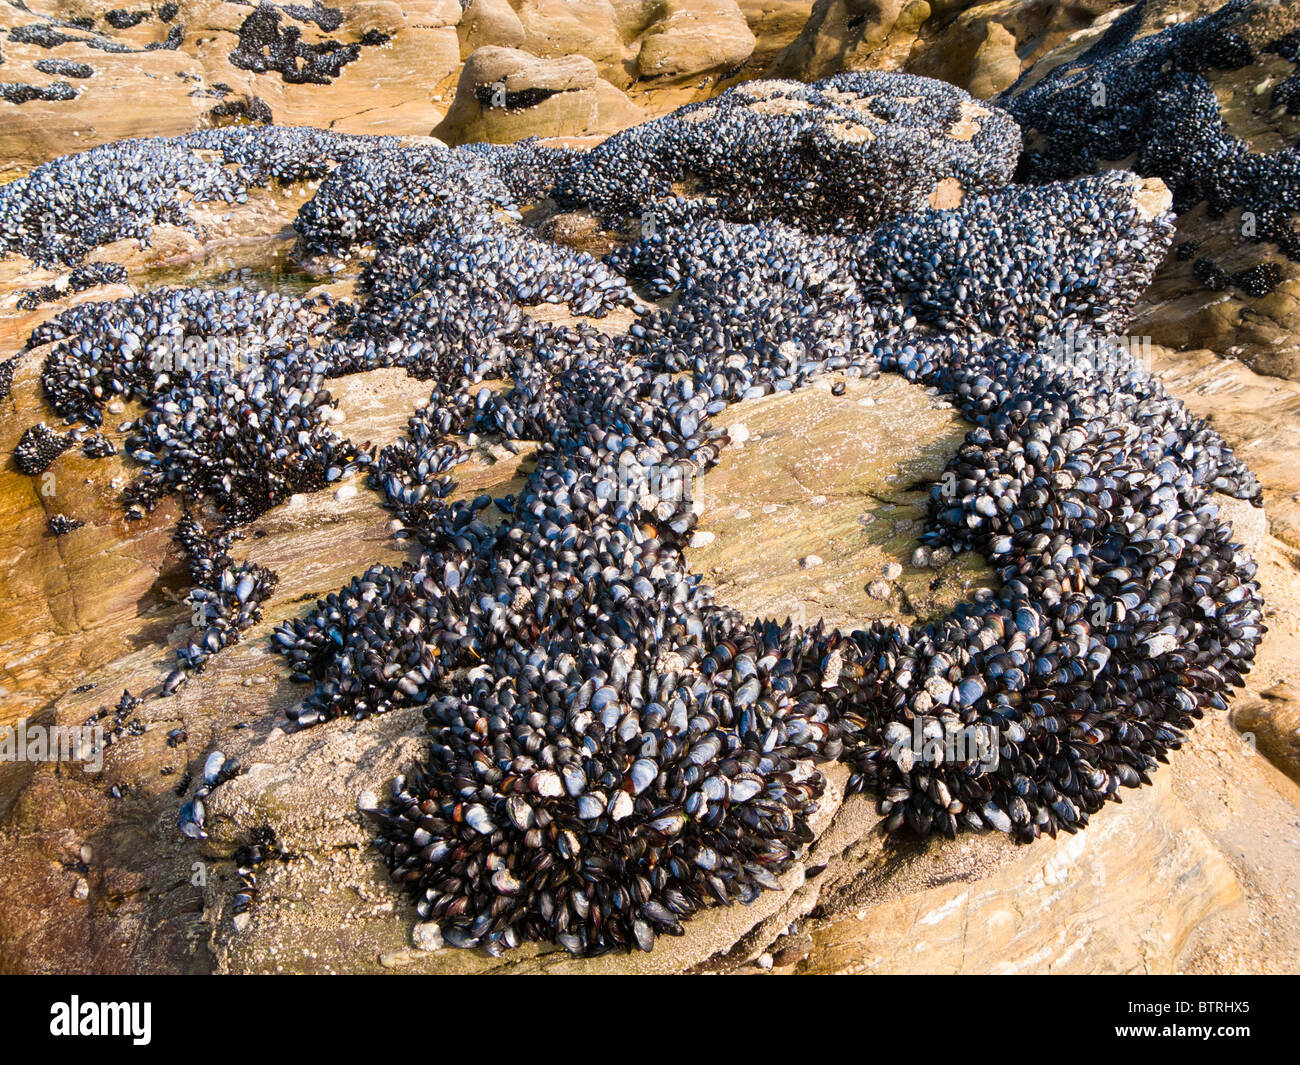 Blue Mussels on rocks France Europe Stock Photo